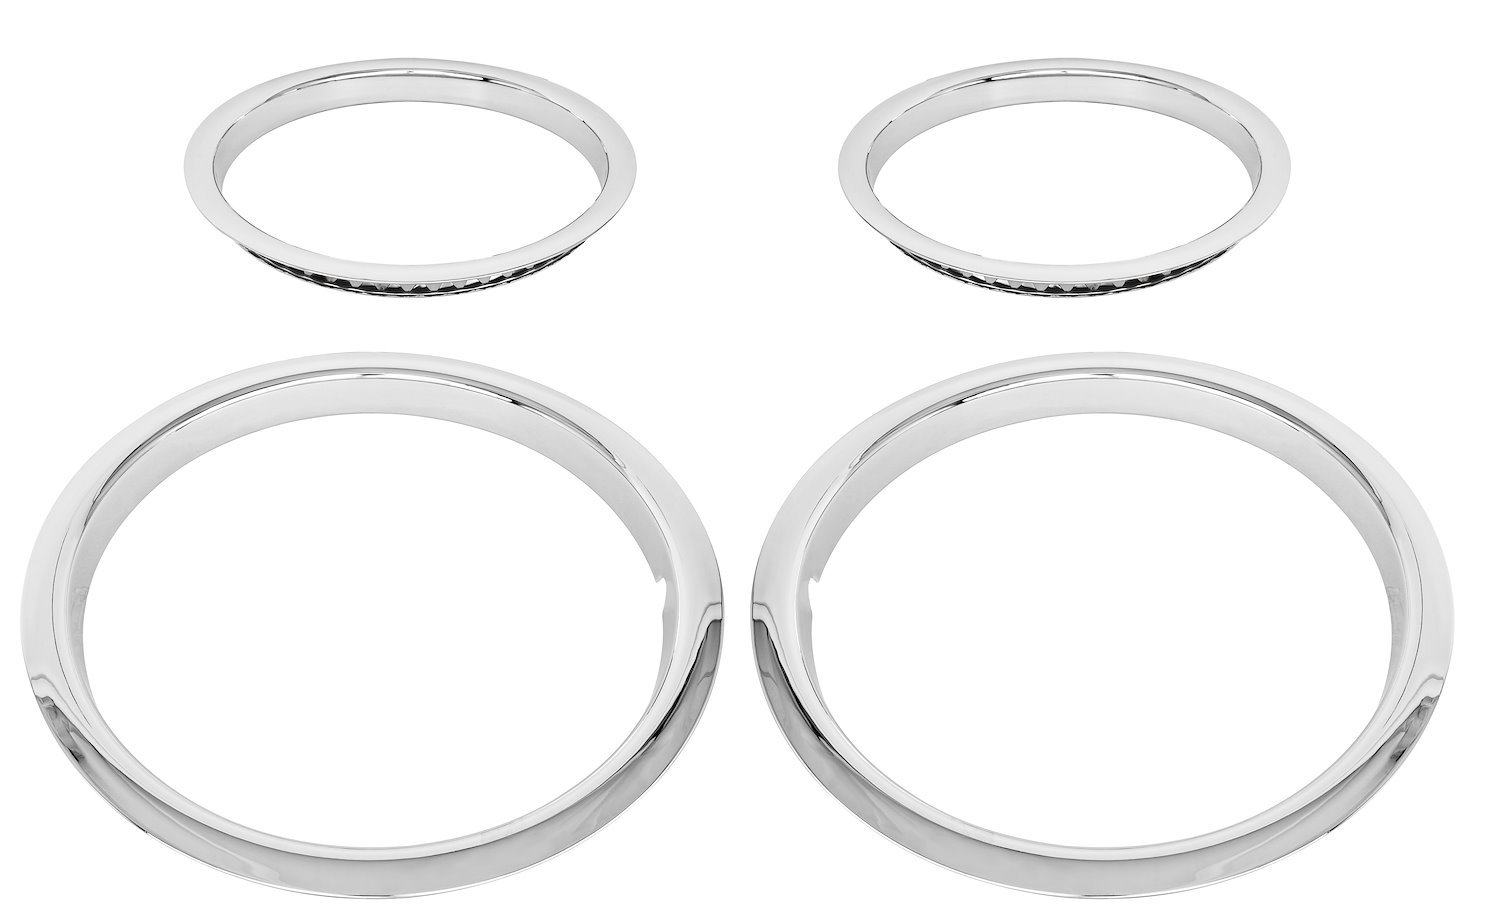 Stainless Steel SS Trim Ring Set for 1970-1981 Chevy Camaro & 1971-1972 Chevy Chevelle, El Camino SS [15 in. x 7 in.]